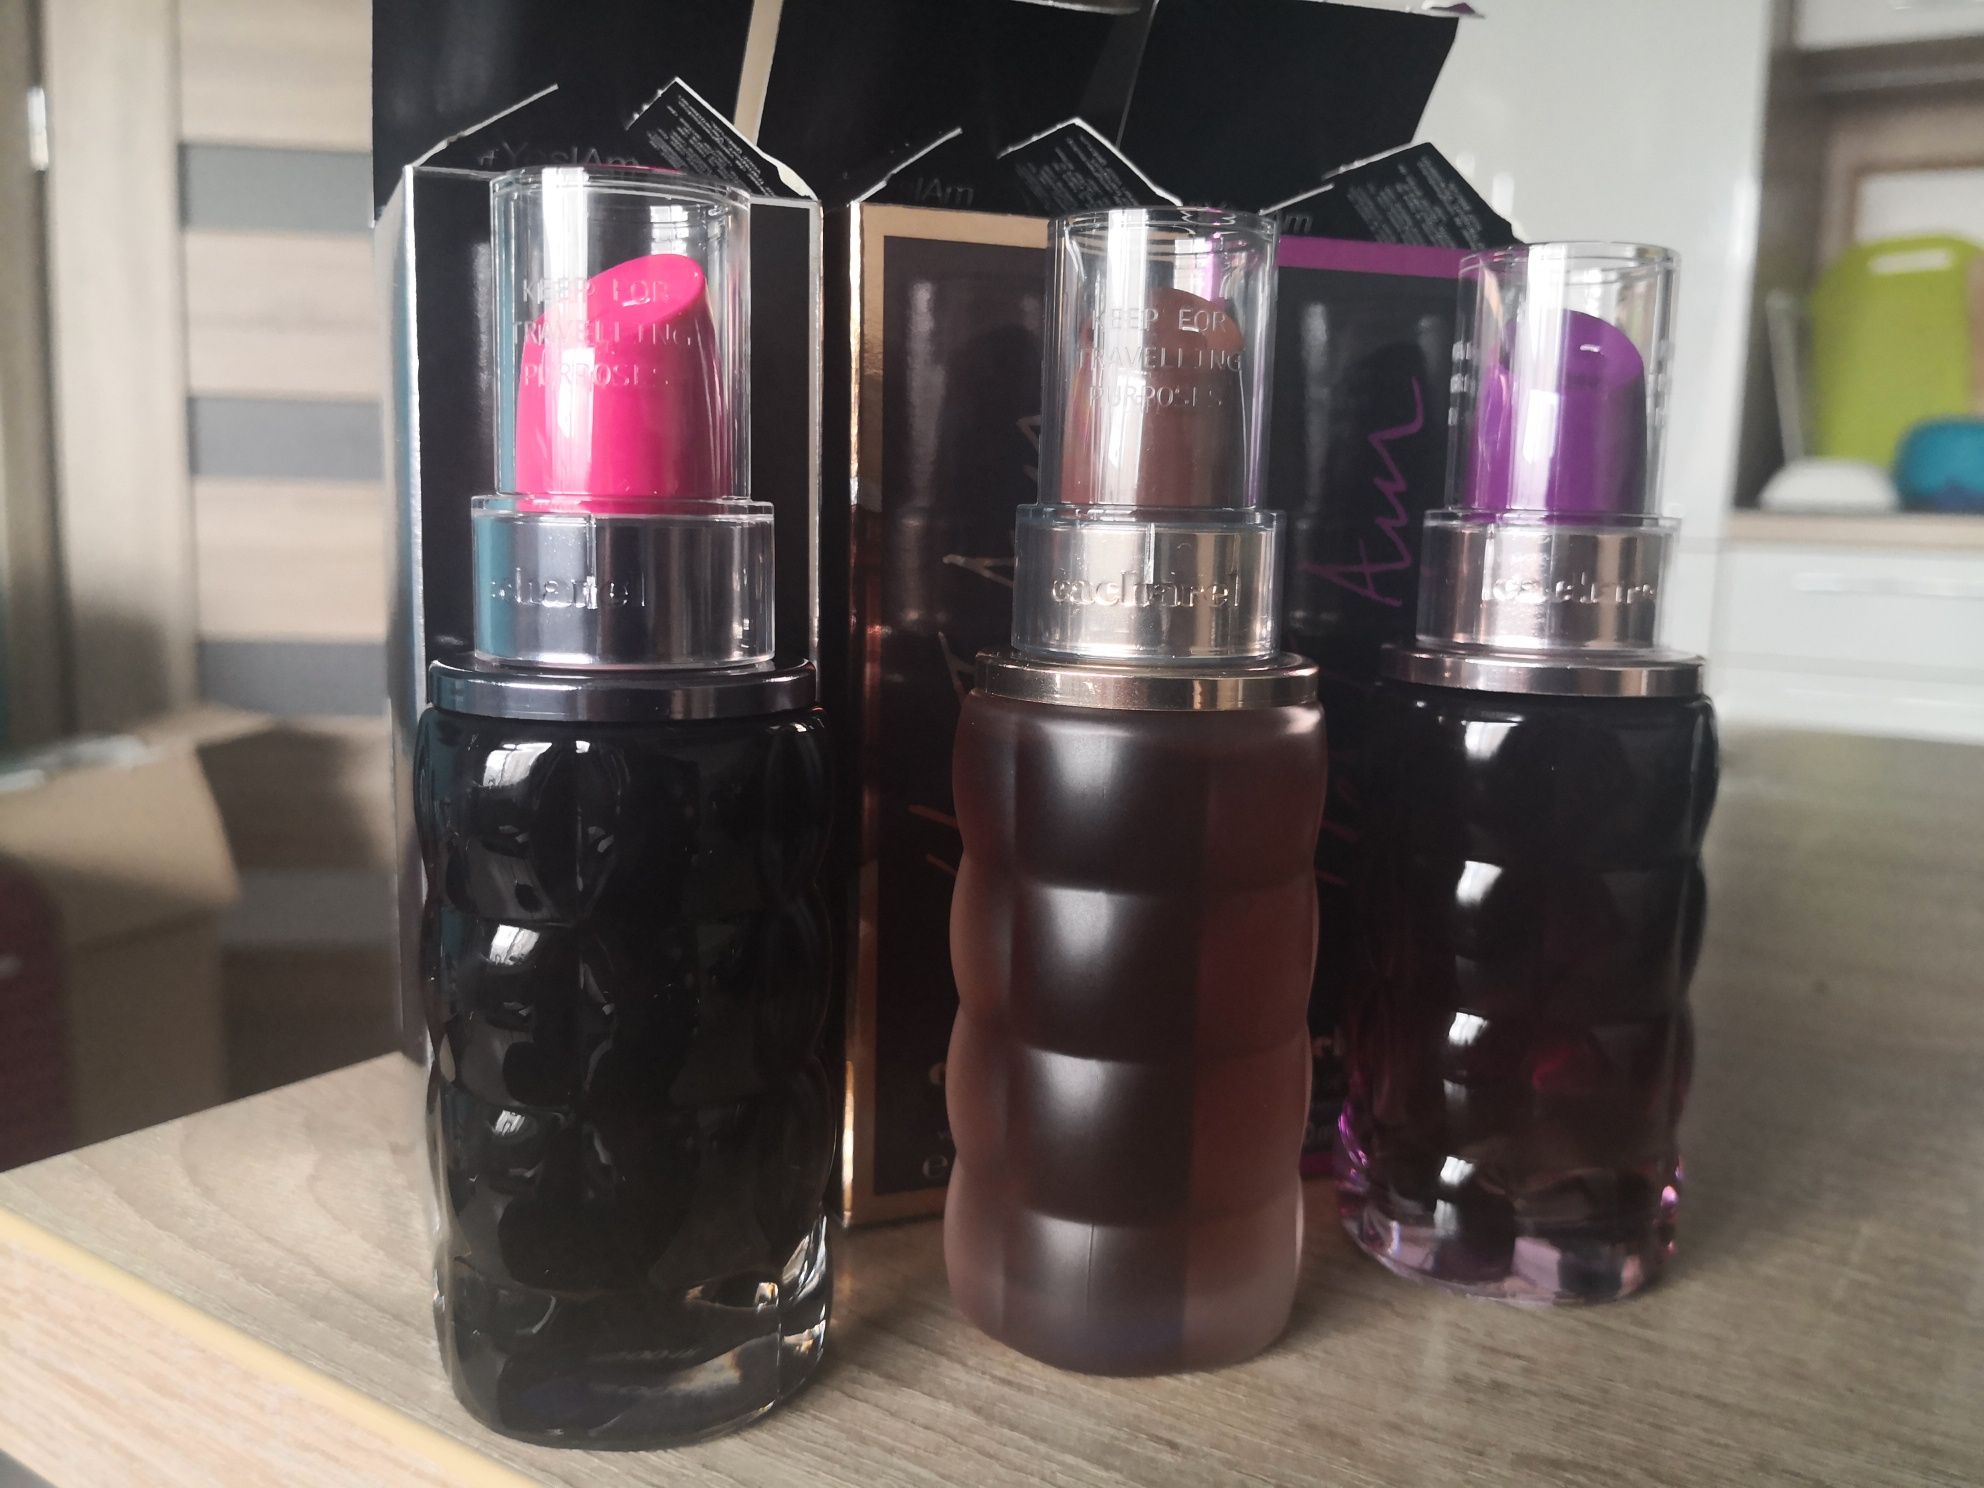 Cacharel - Yes I Am Pink First, Delicious and Fabulous 3x 50 ml